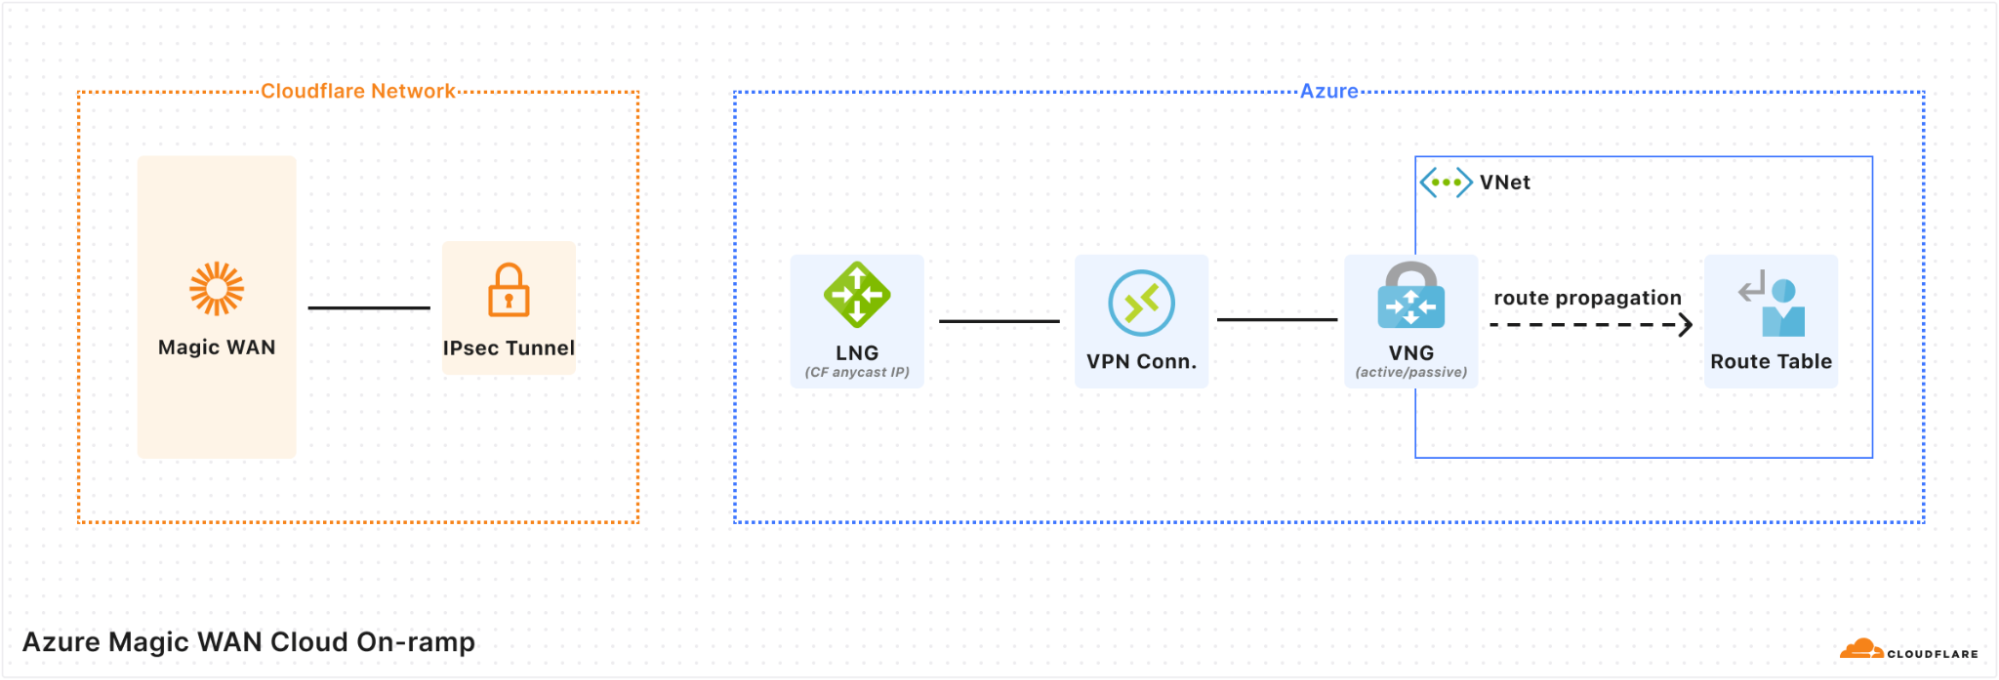 Diagram showing how Cloudflare creates on-ramps to AWS